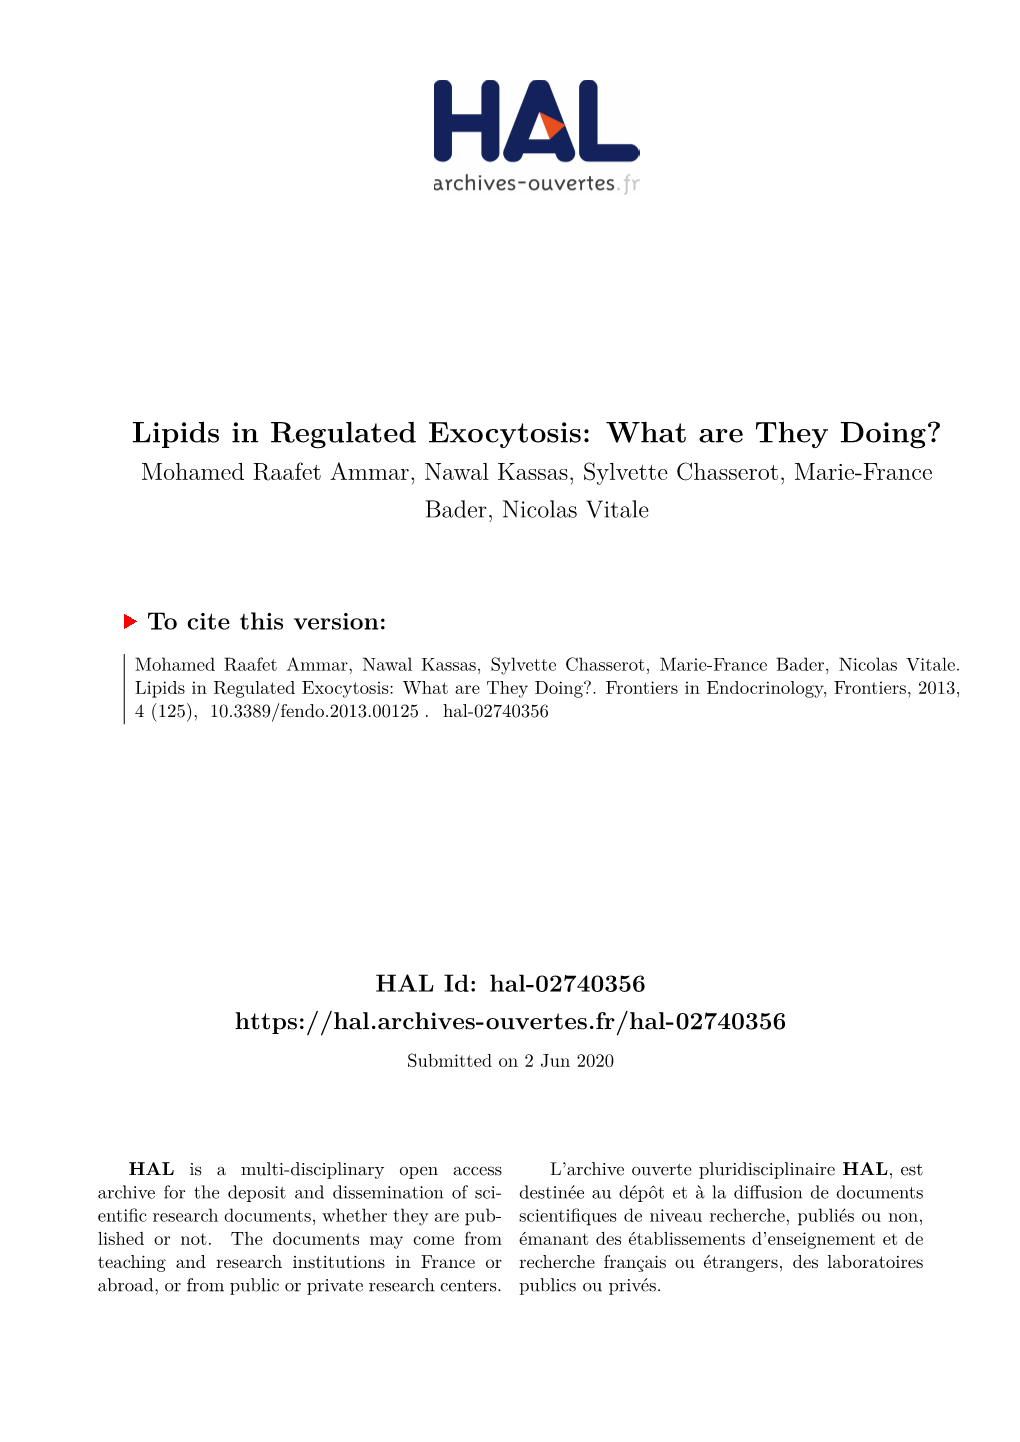 Lipids in Regulated Exocytosis: What Are They Doing? Mohamed Raafet Ammar, Nawal Kassas, Sylvette Chasserot, Marie-France Bader, Nicolas Vitale